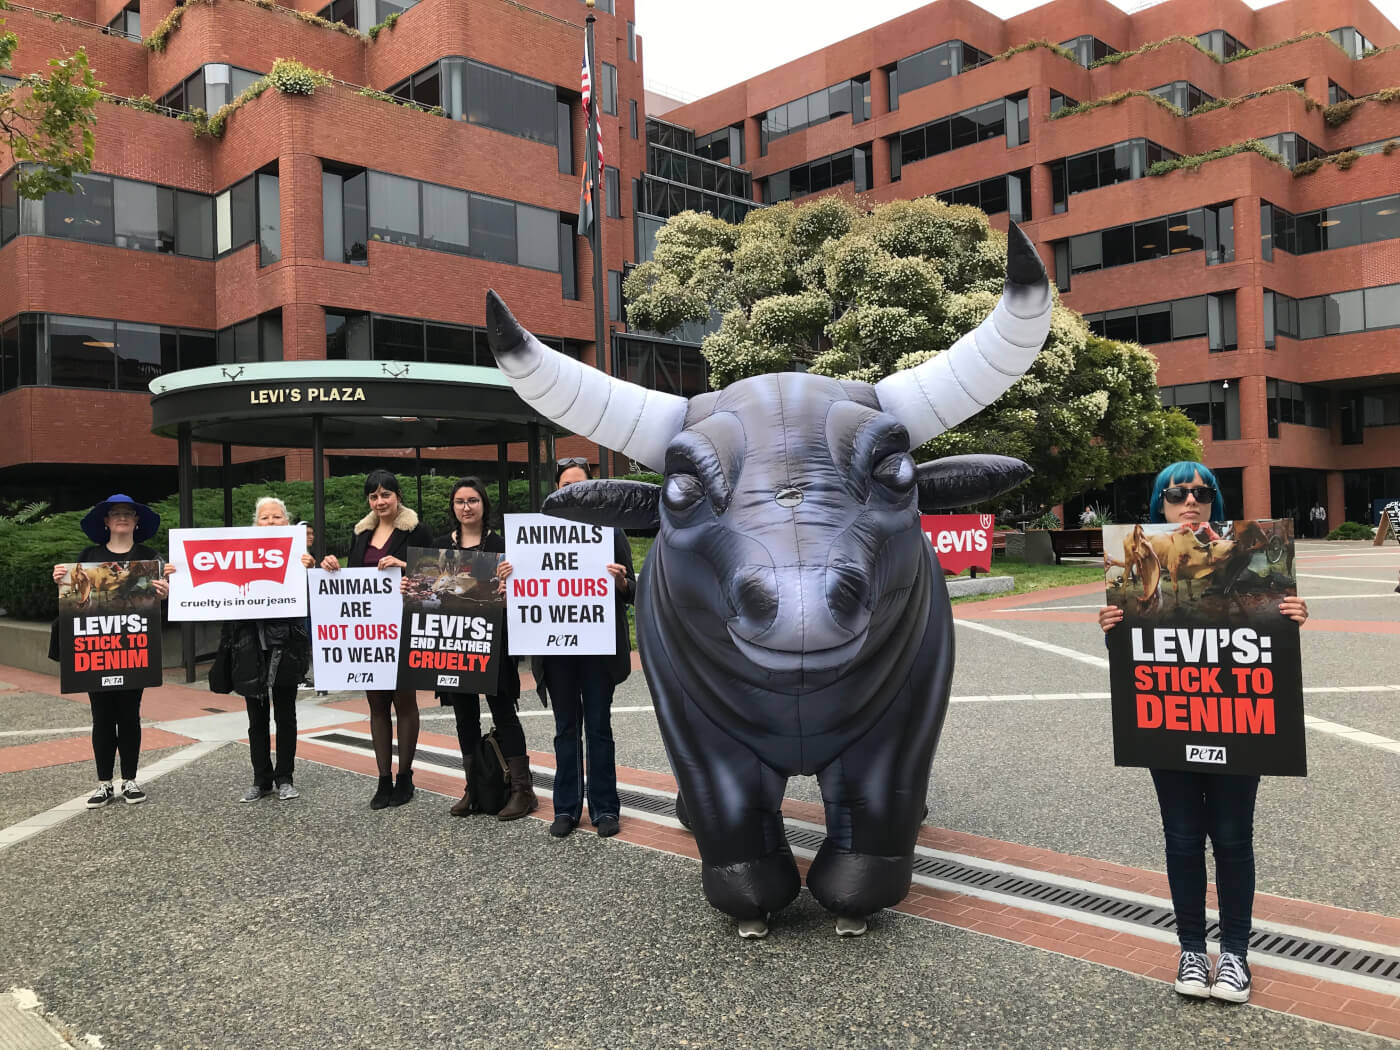 Levi's Asked to Look Into Suppliers' Slaughter Methods | PETA